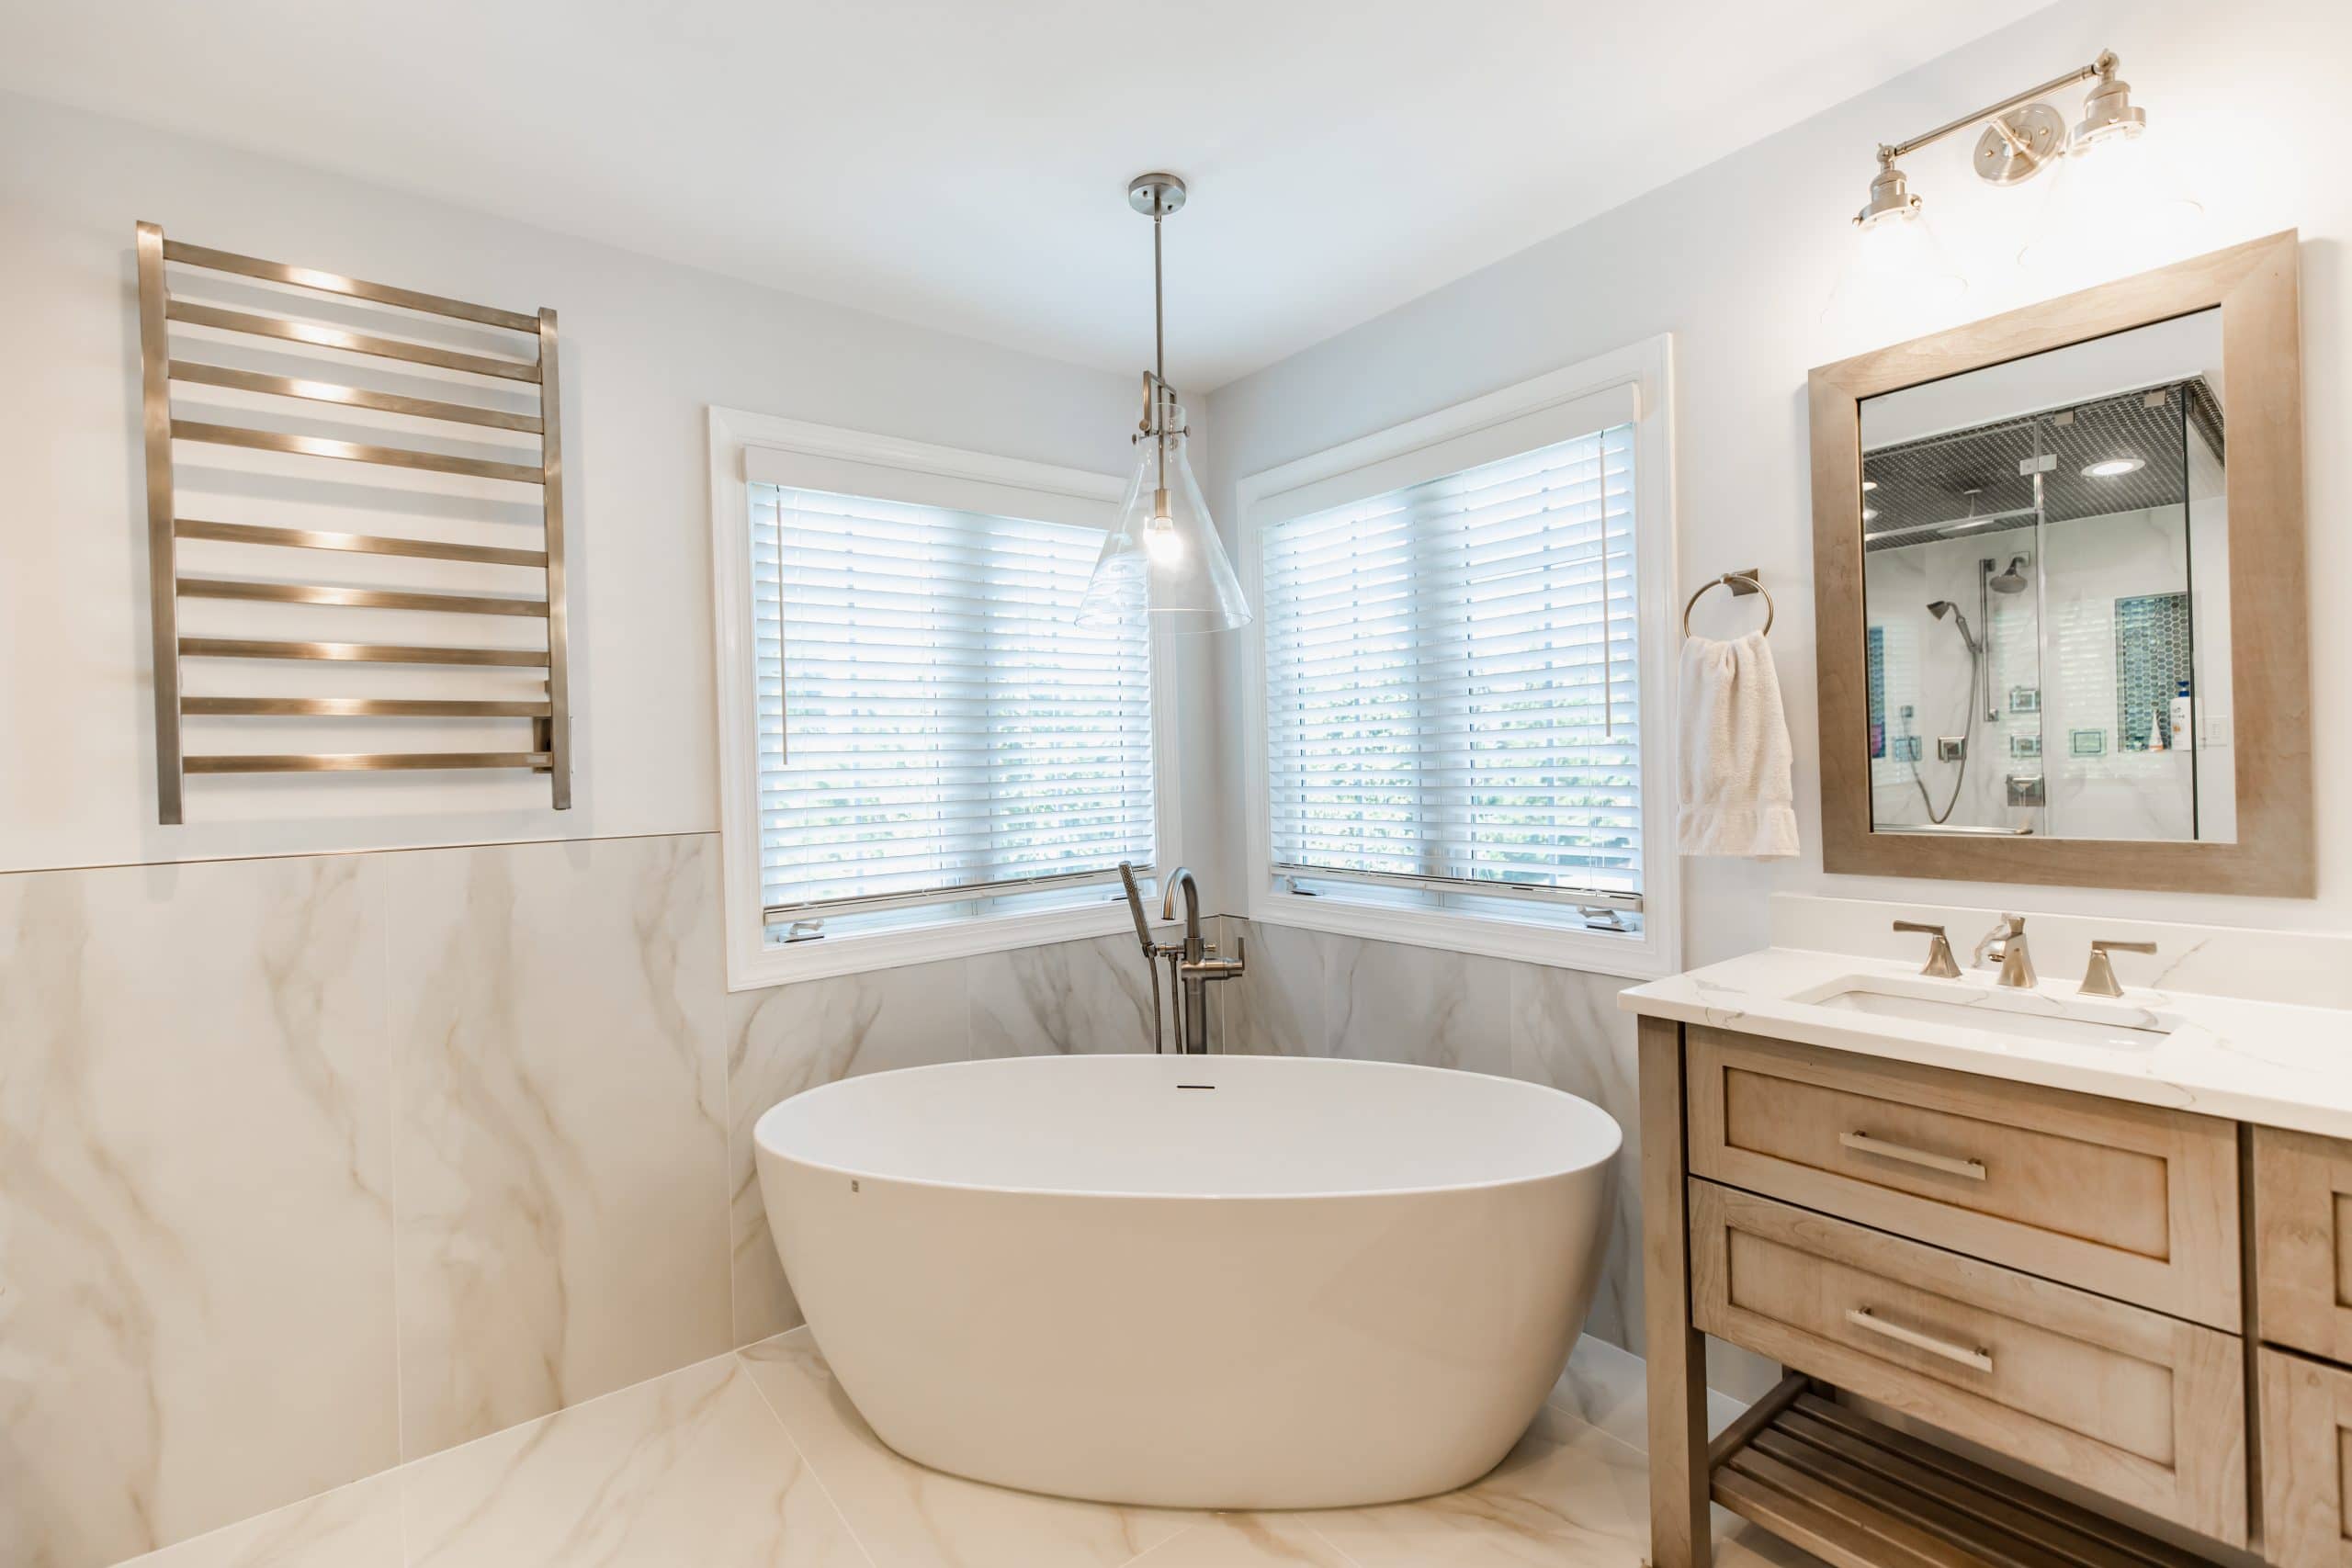 The Real Cost of Bathroom Remodeling in Leesburg Explained